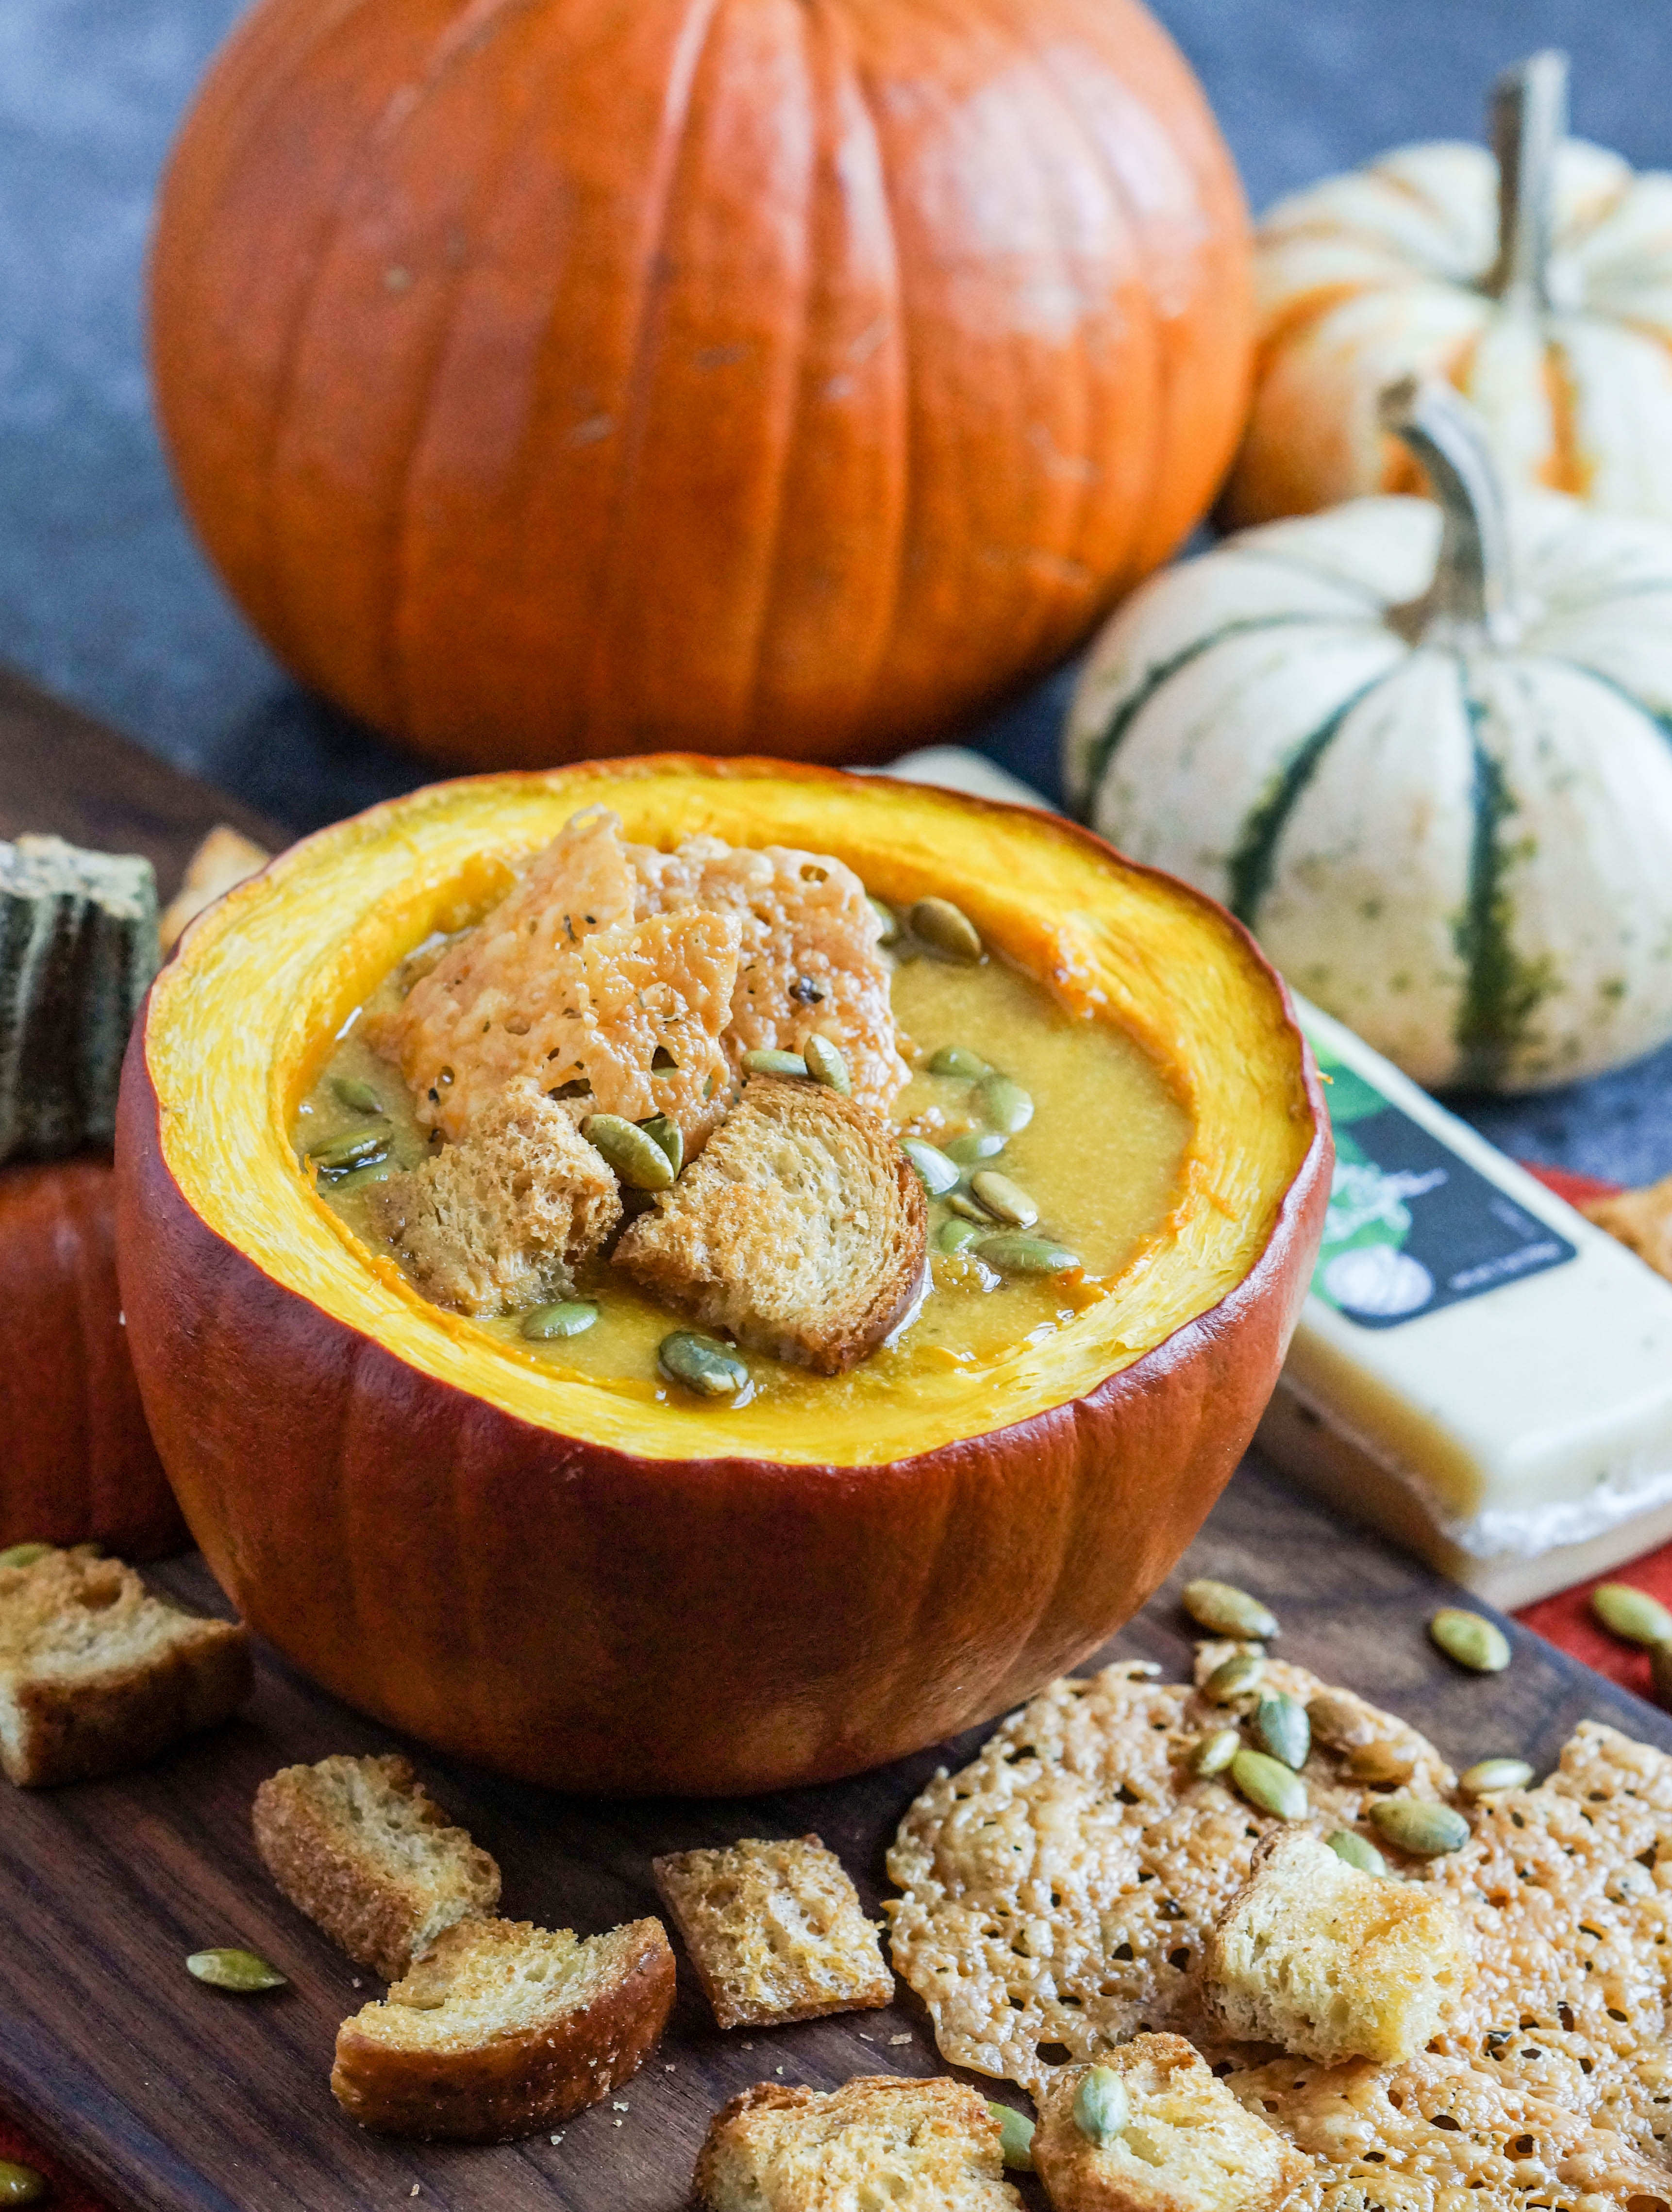 Pumpkin Cheese Soup with Garlic Basil Cheese Crisps in a roasted pumpkin with more pumpkins in the background.